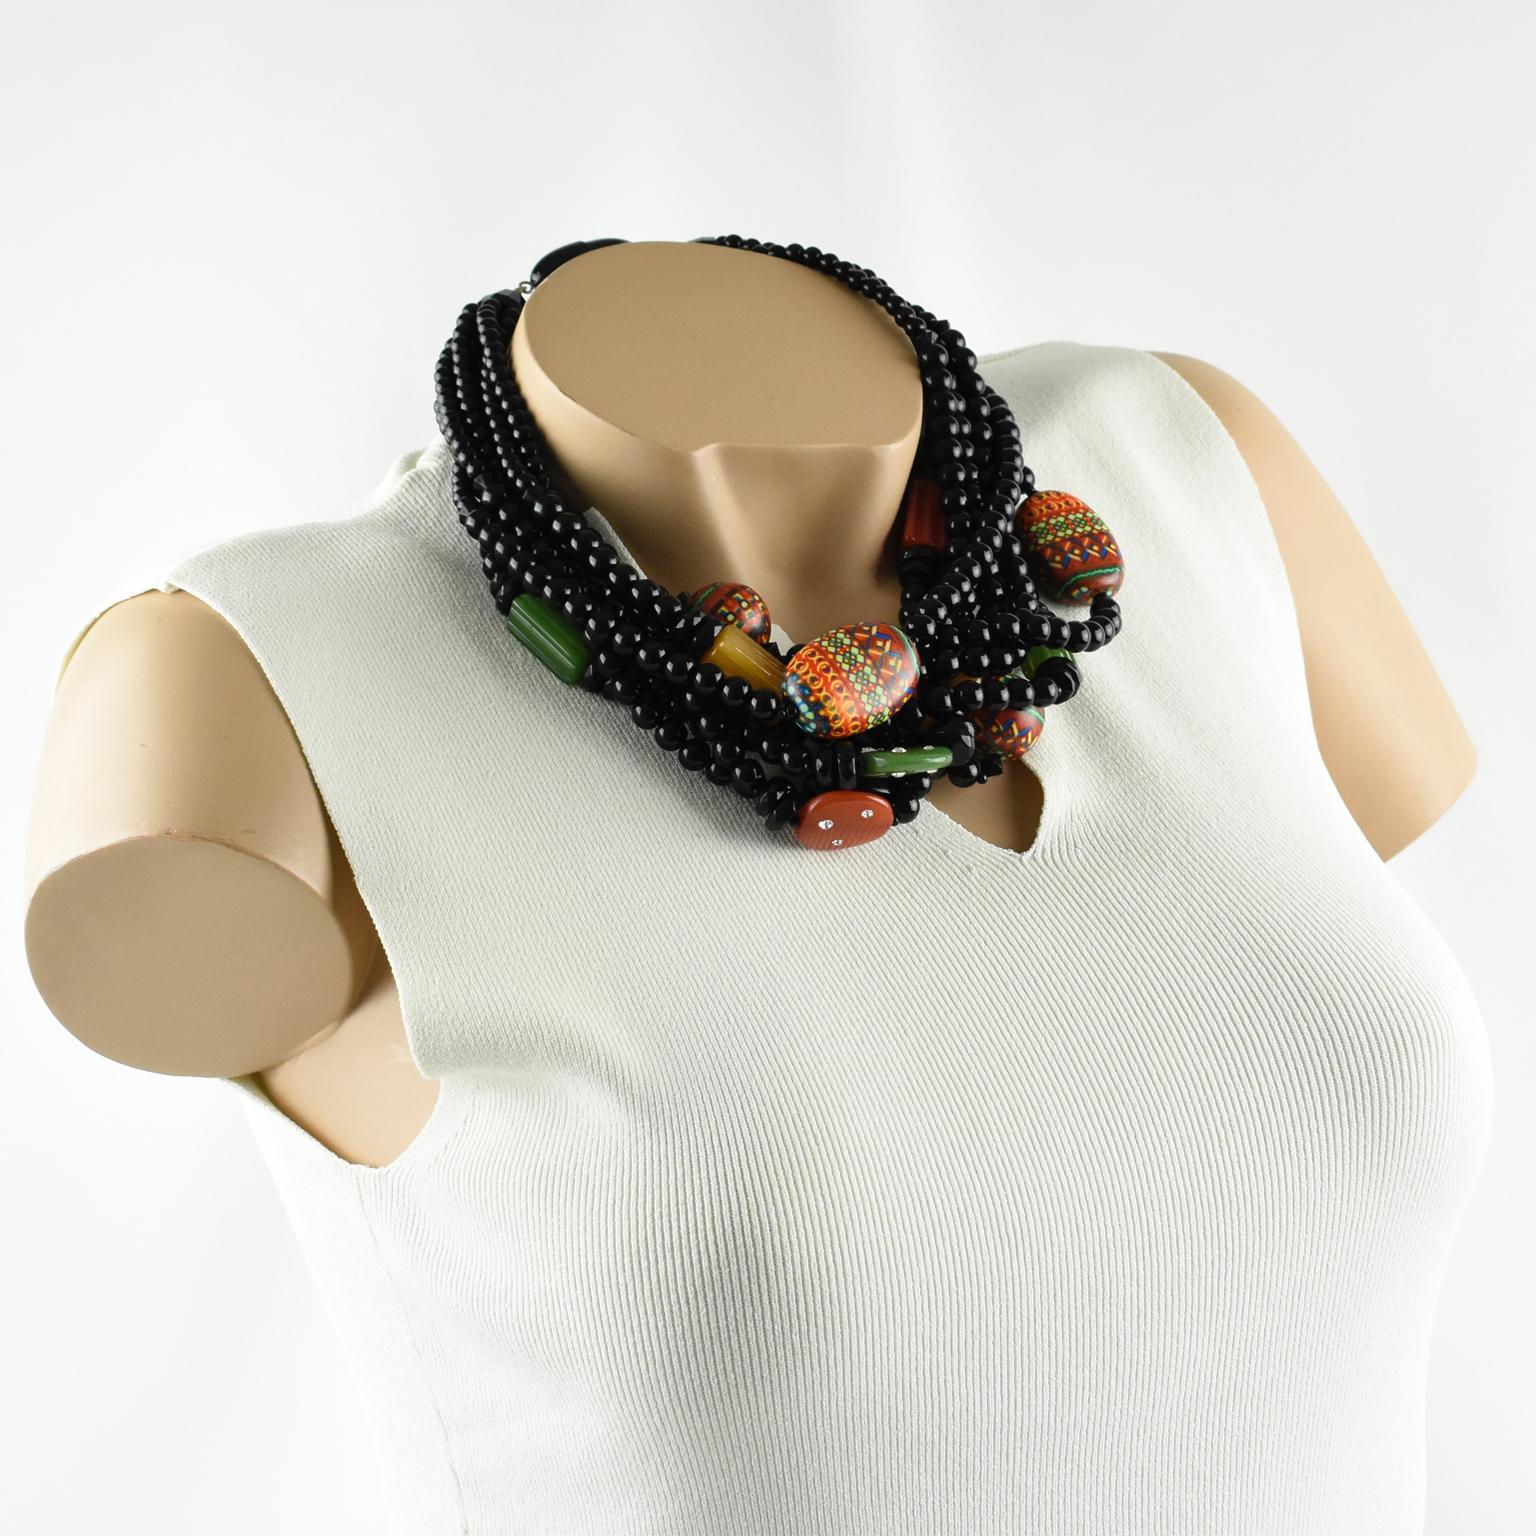 Superb Angela Caputi, made in Italy resin choker beaded necklace. Oversized fruit salad multi-strand design with dominant black color contrasted with green, beige, carrot orange, and tangerine resin pebbles beads, compliment with large multicolor